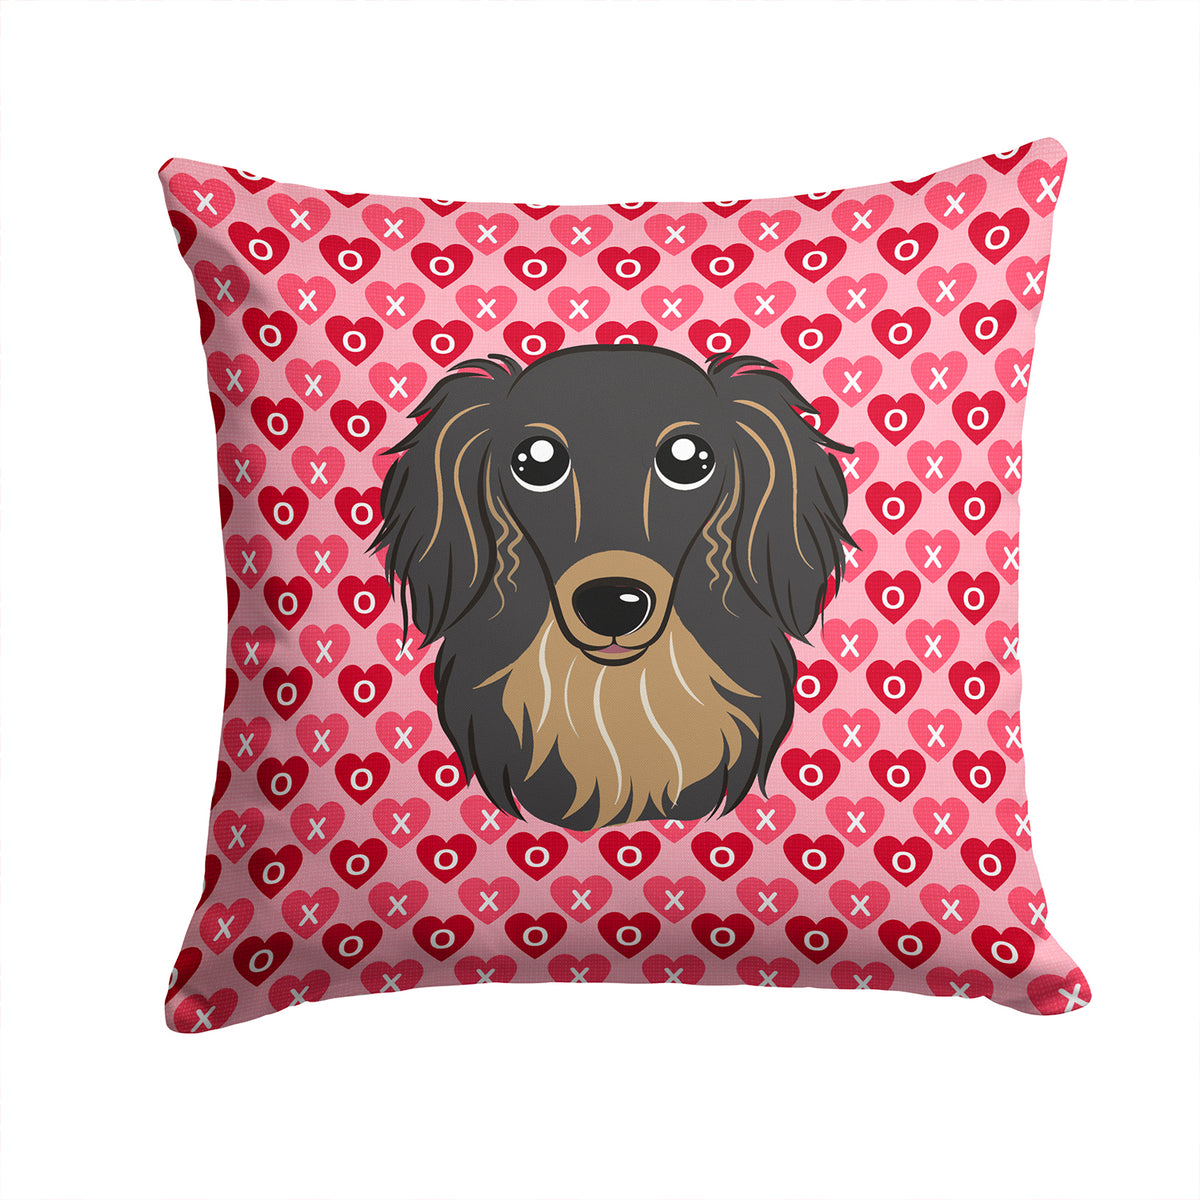 Longhair Black and Tan Dachshund Hearts Fabric Decorative Pillow BB5283PW1414 - the-store.com